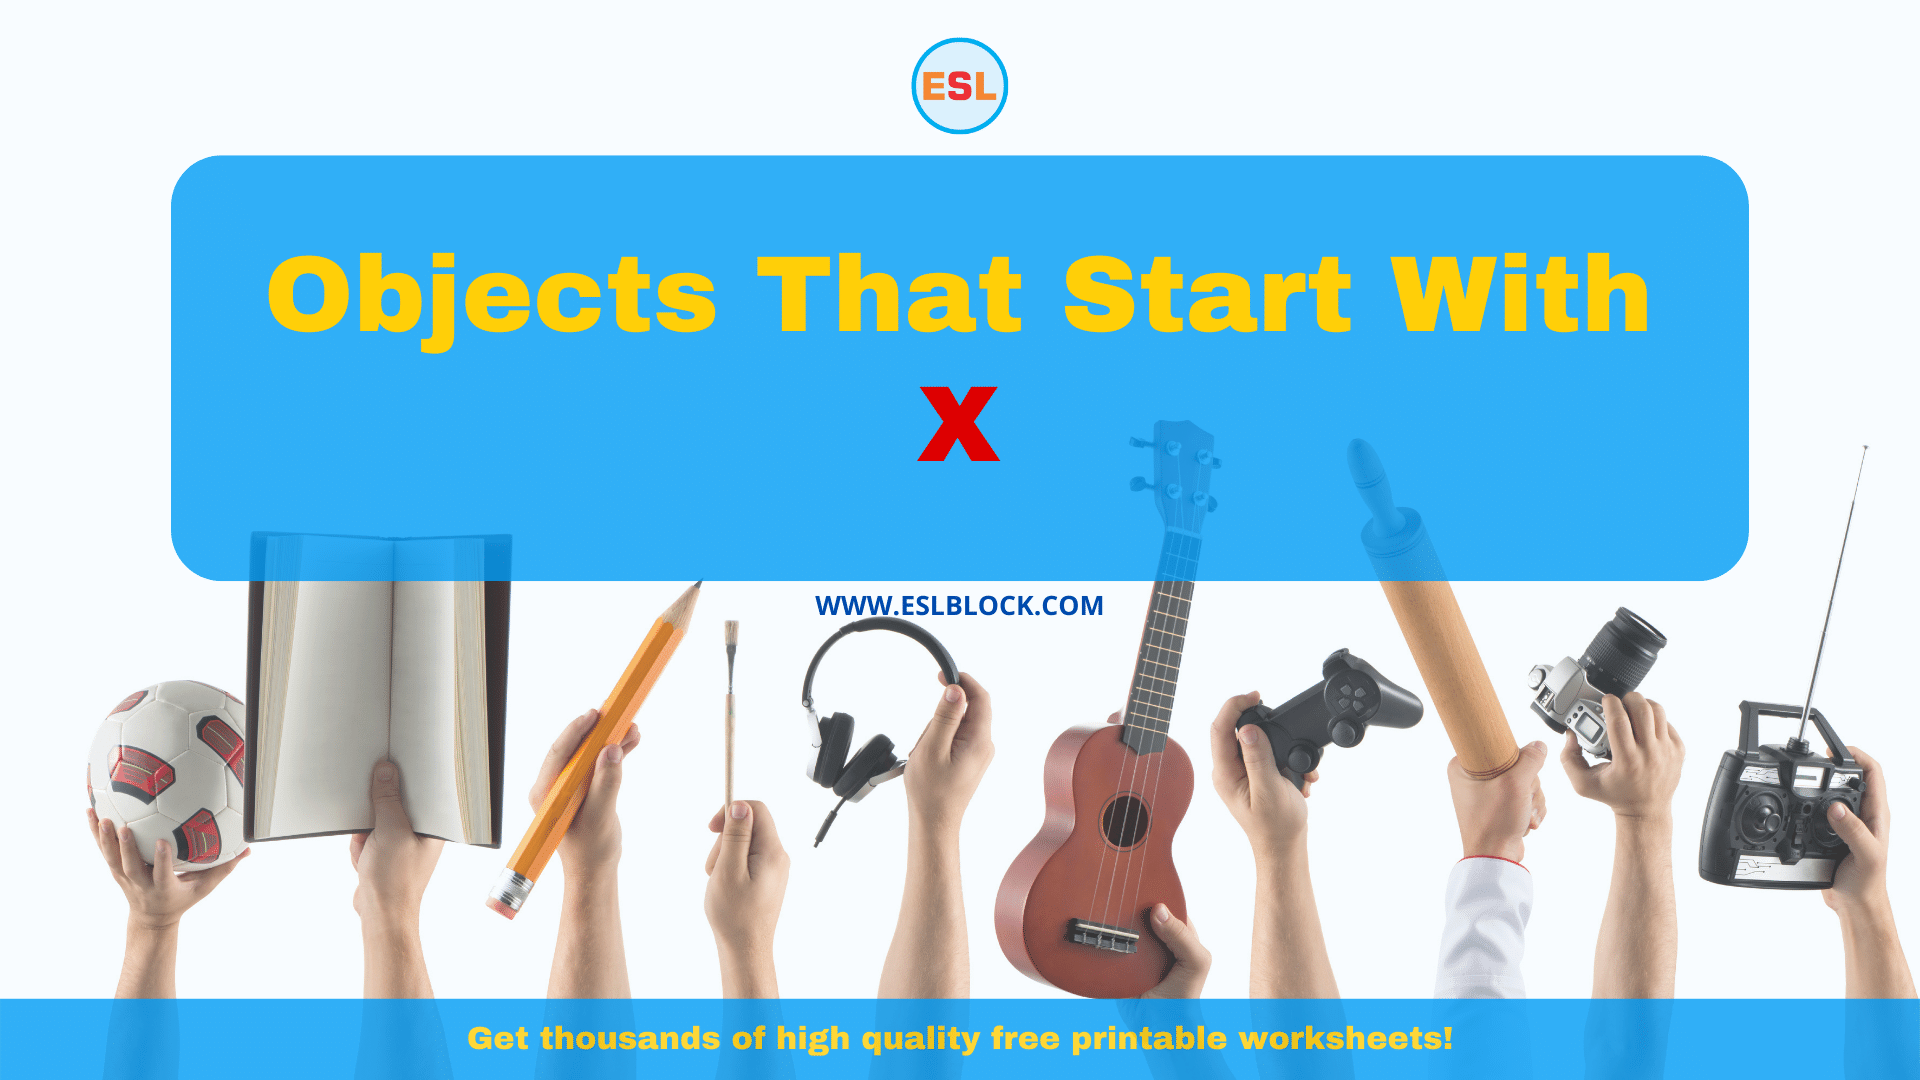 5 Letter Objects Starting With X, English, English Nouns, English Vocabulary, English Words, List of Objects That Start With X, Nouns, Objects List, Objects That Start With X, Things Names, Vocabulary, X Objects, X Objects in English, X Objects Names